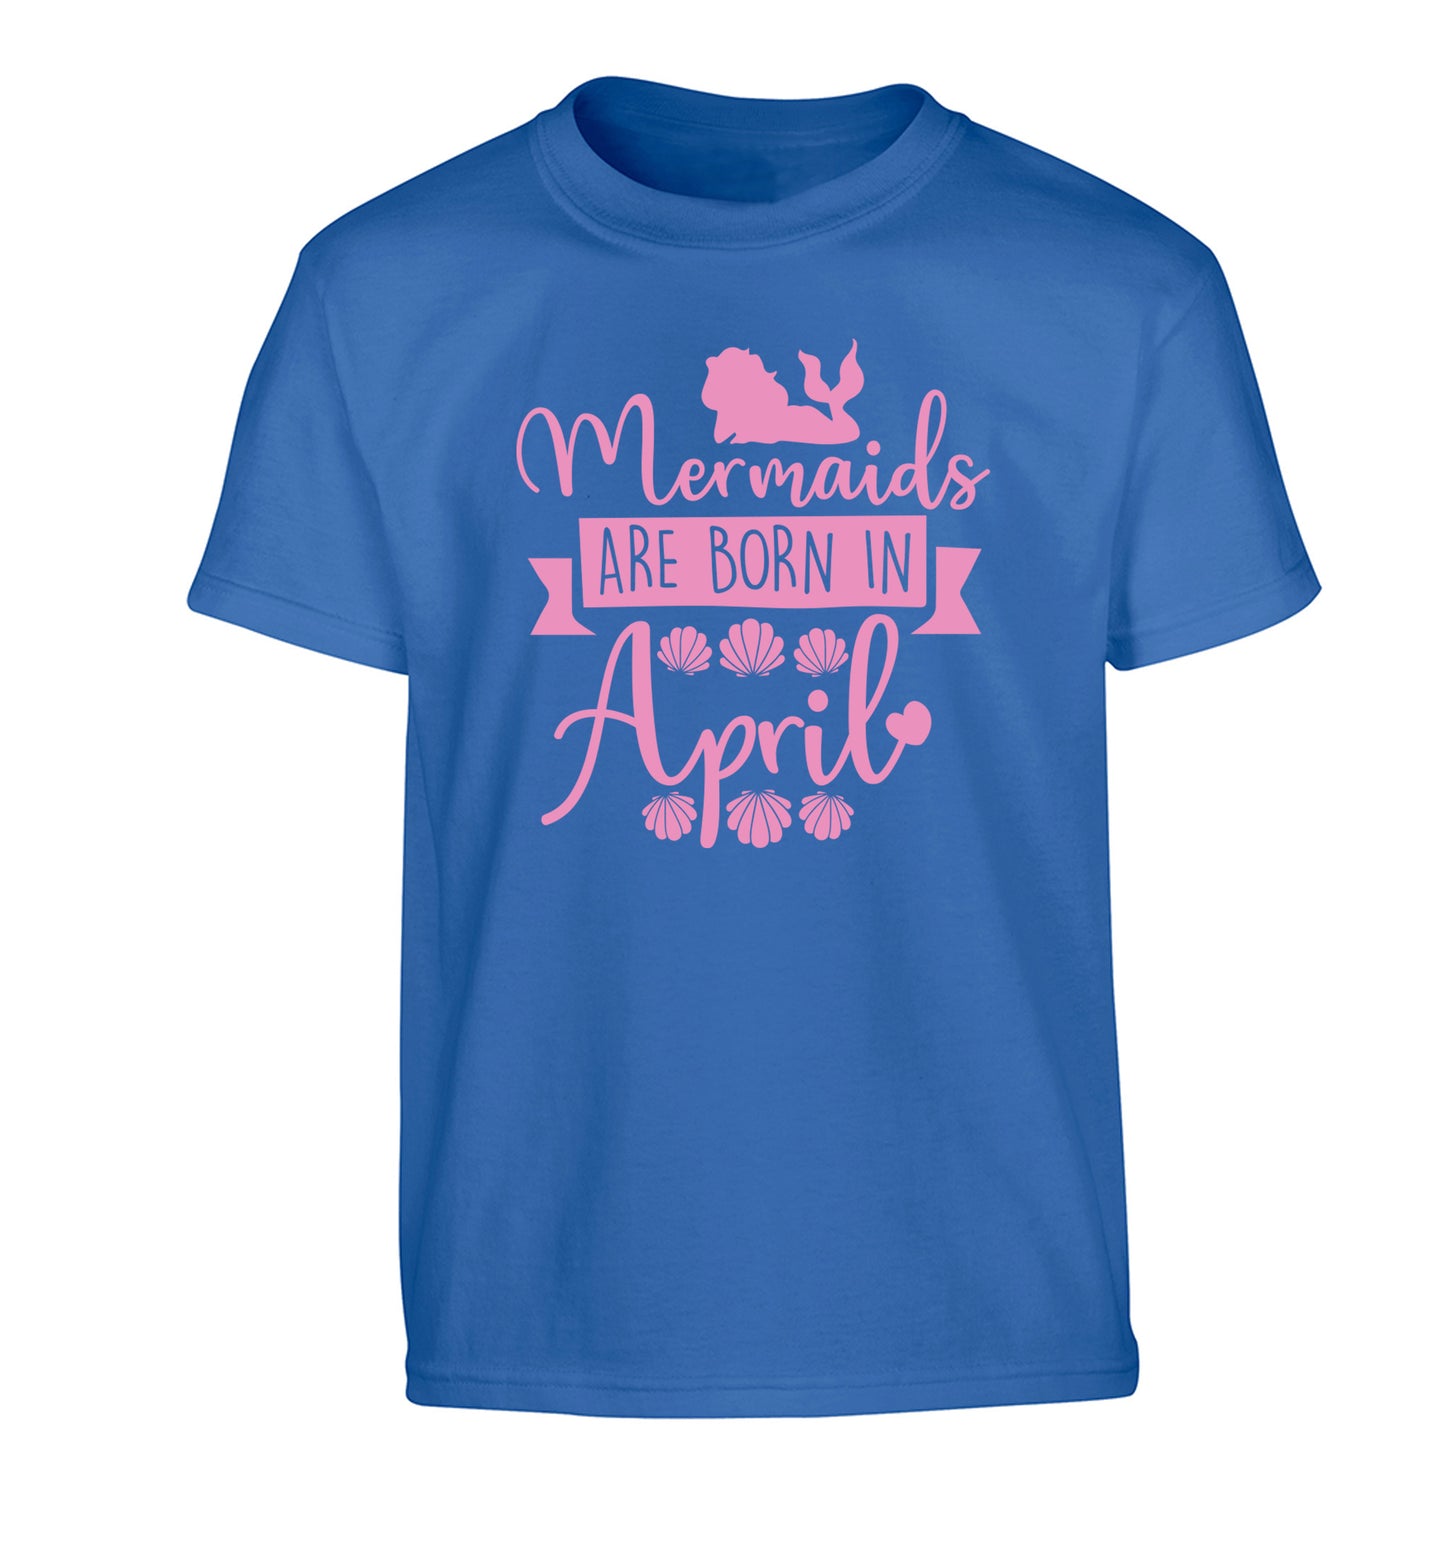 Mermaids are born in April Children's blue Tshirt 12-13 Years